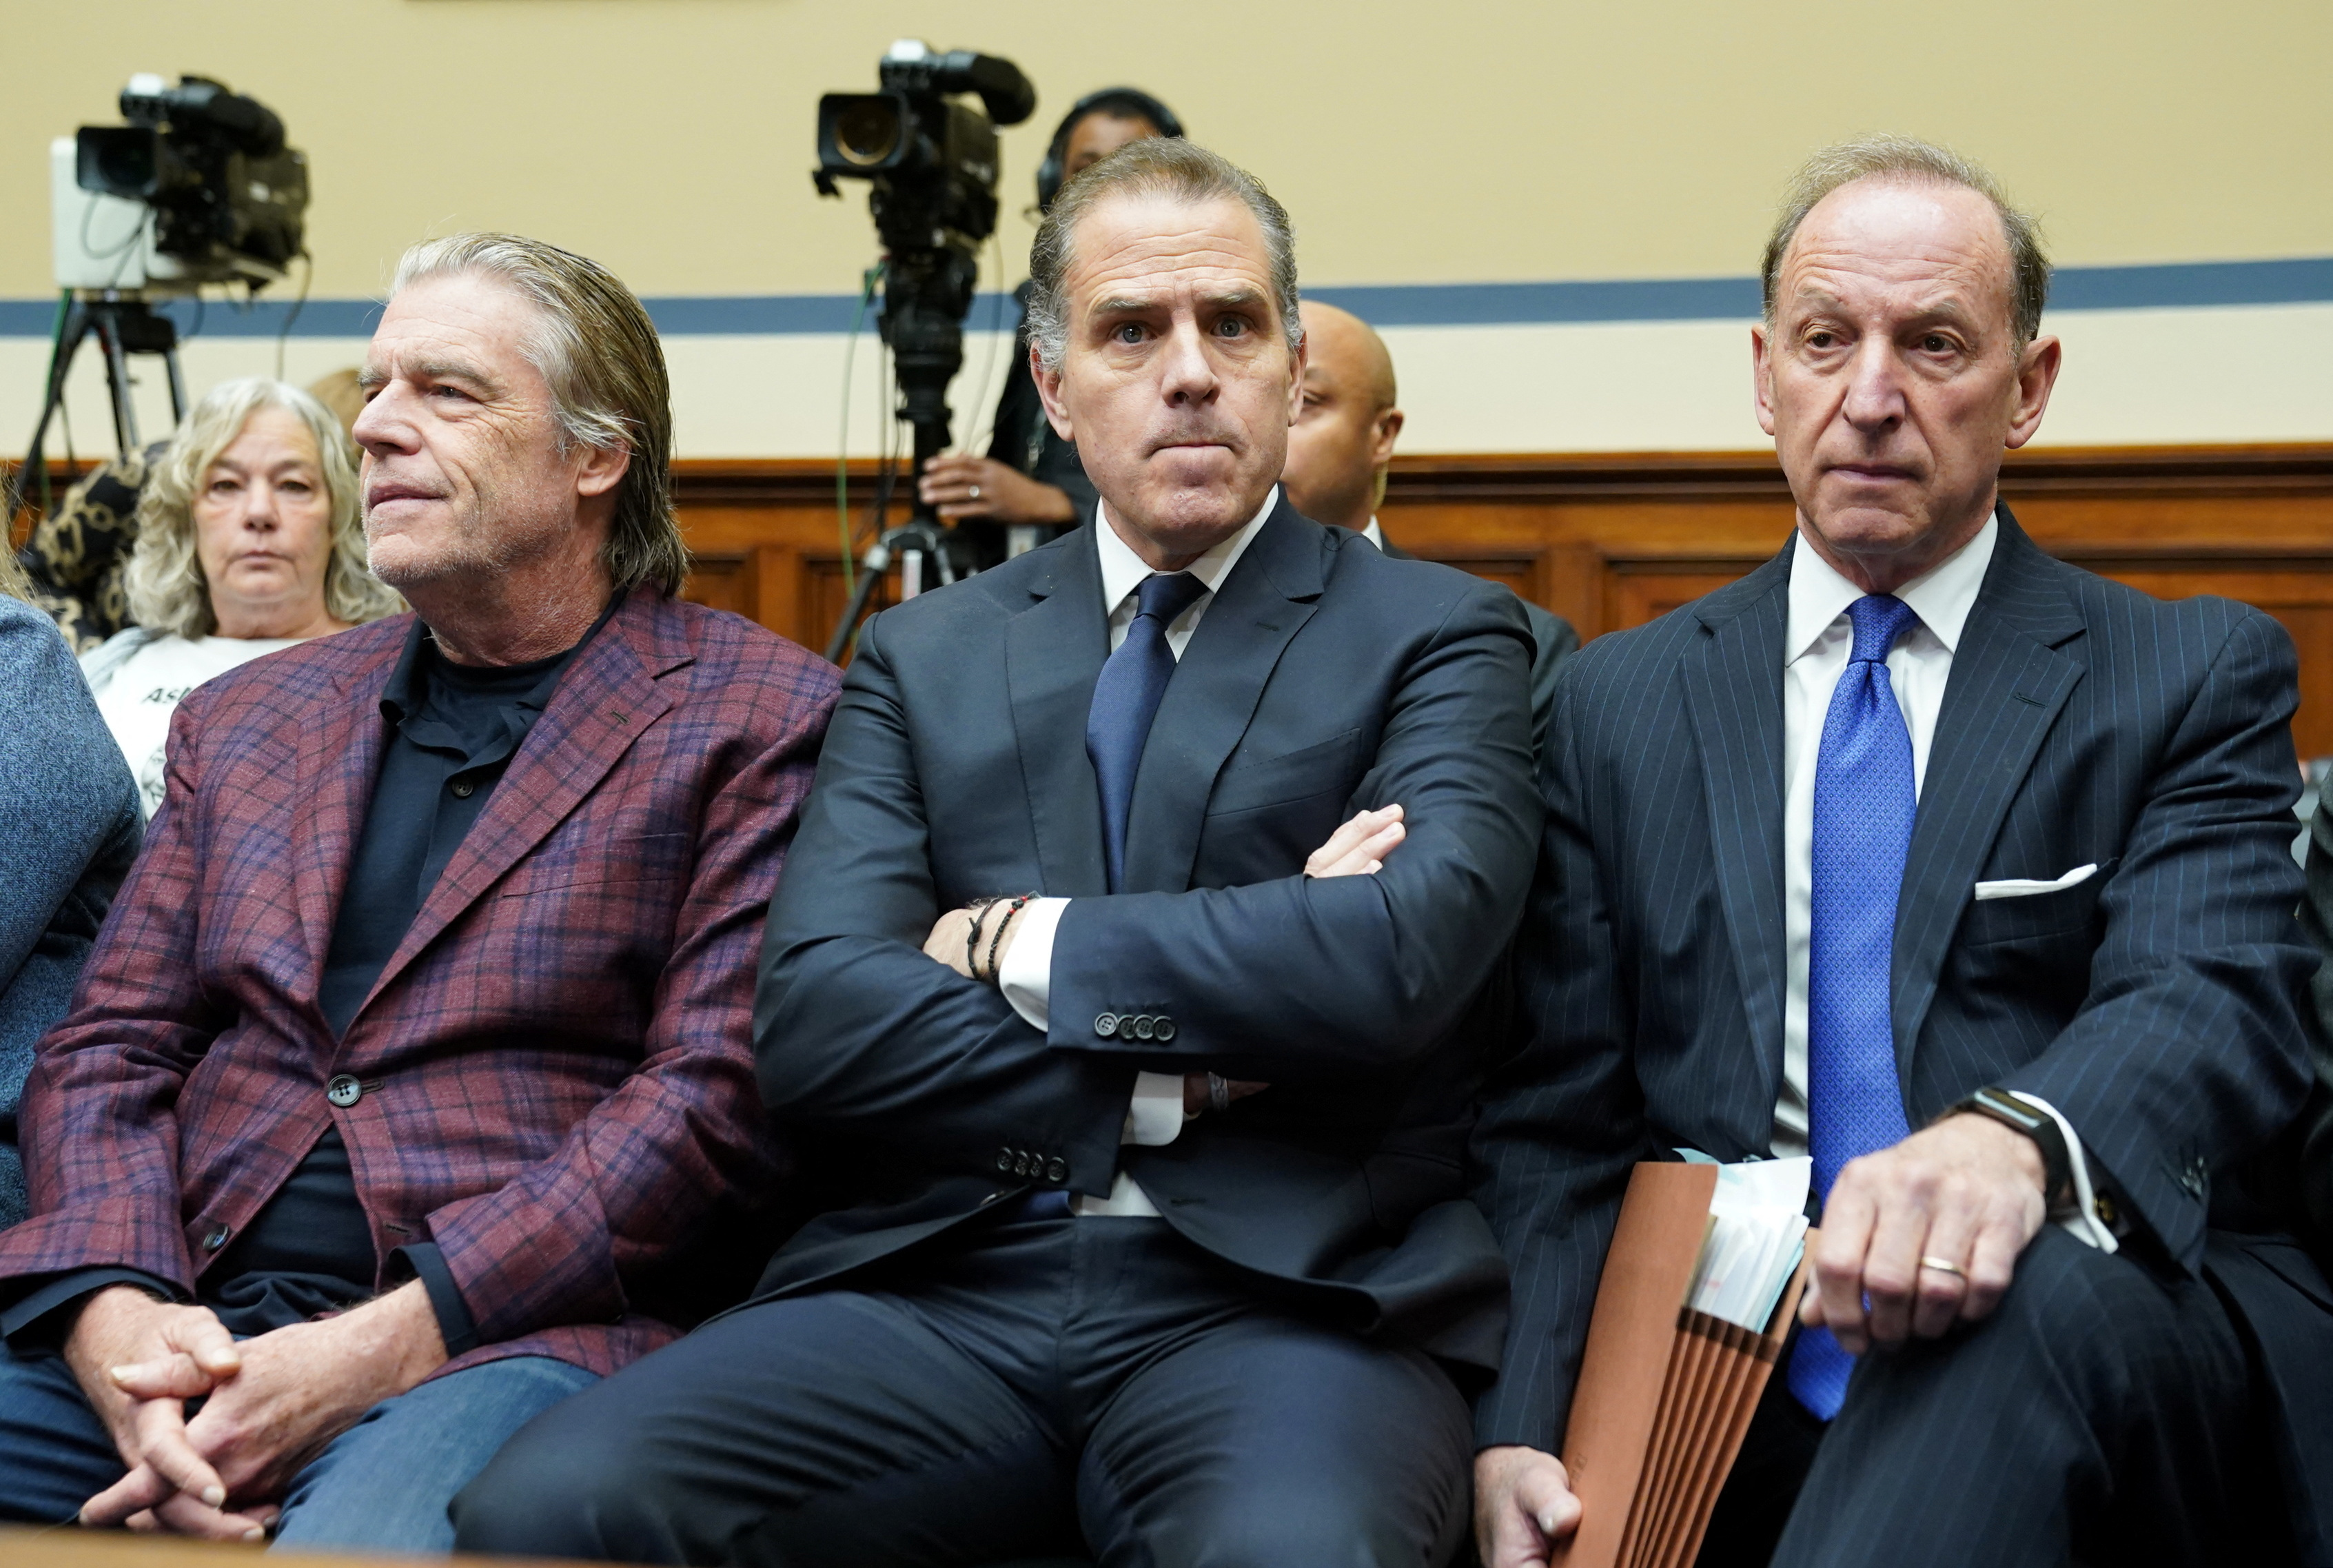 Hunter Biden, center, sits with his lawyers — Kevin Morris, left, and Abbe Lowell, right — during a hearing on Capitol Hill in Washington, DC, on January 10.